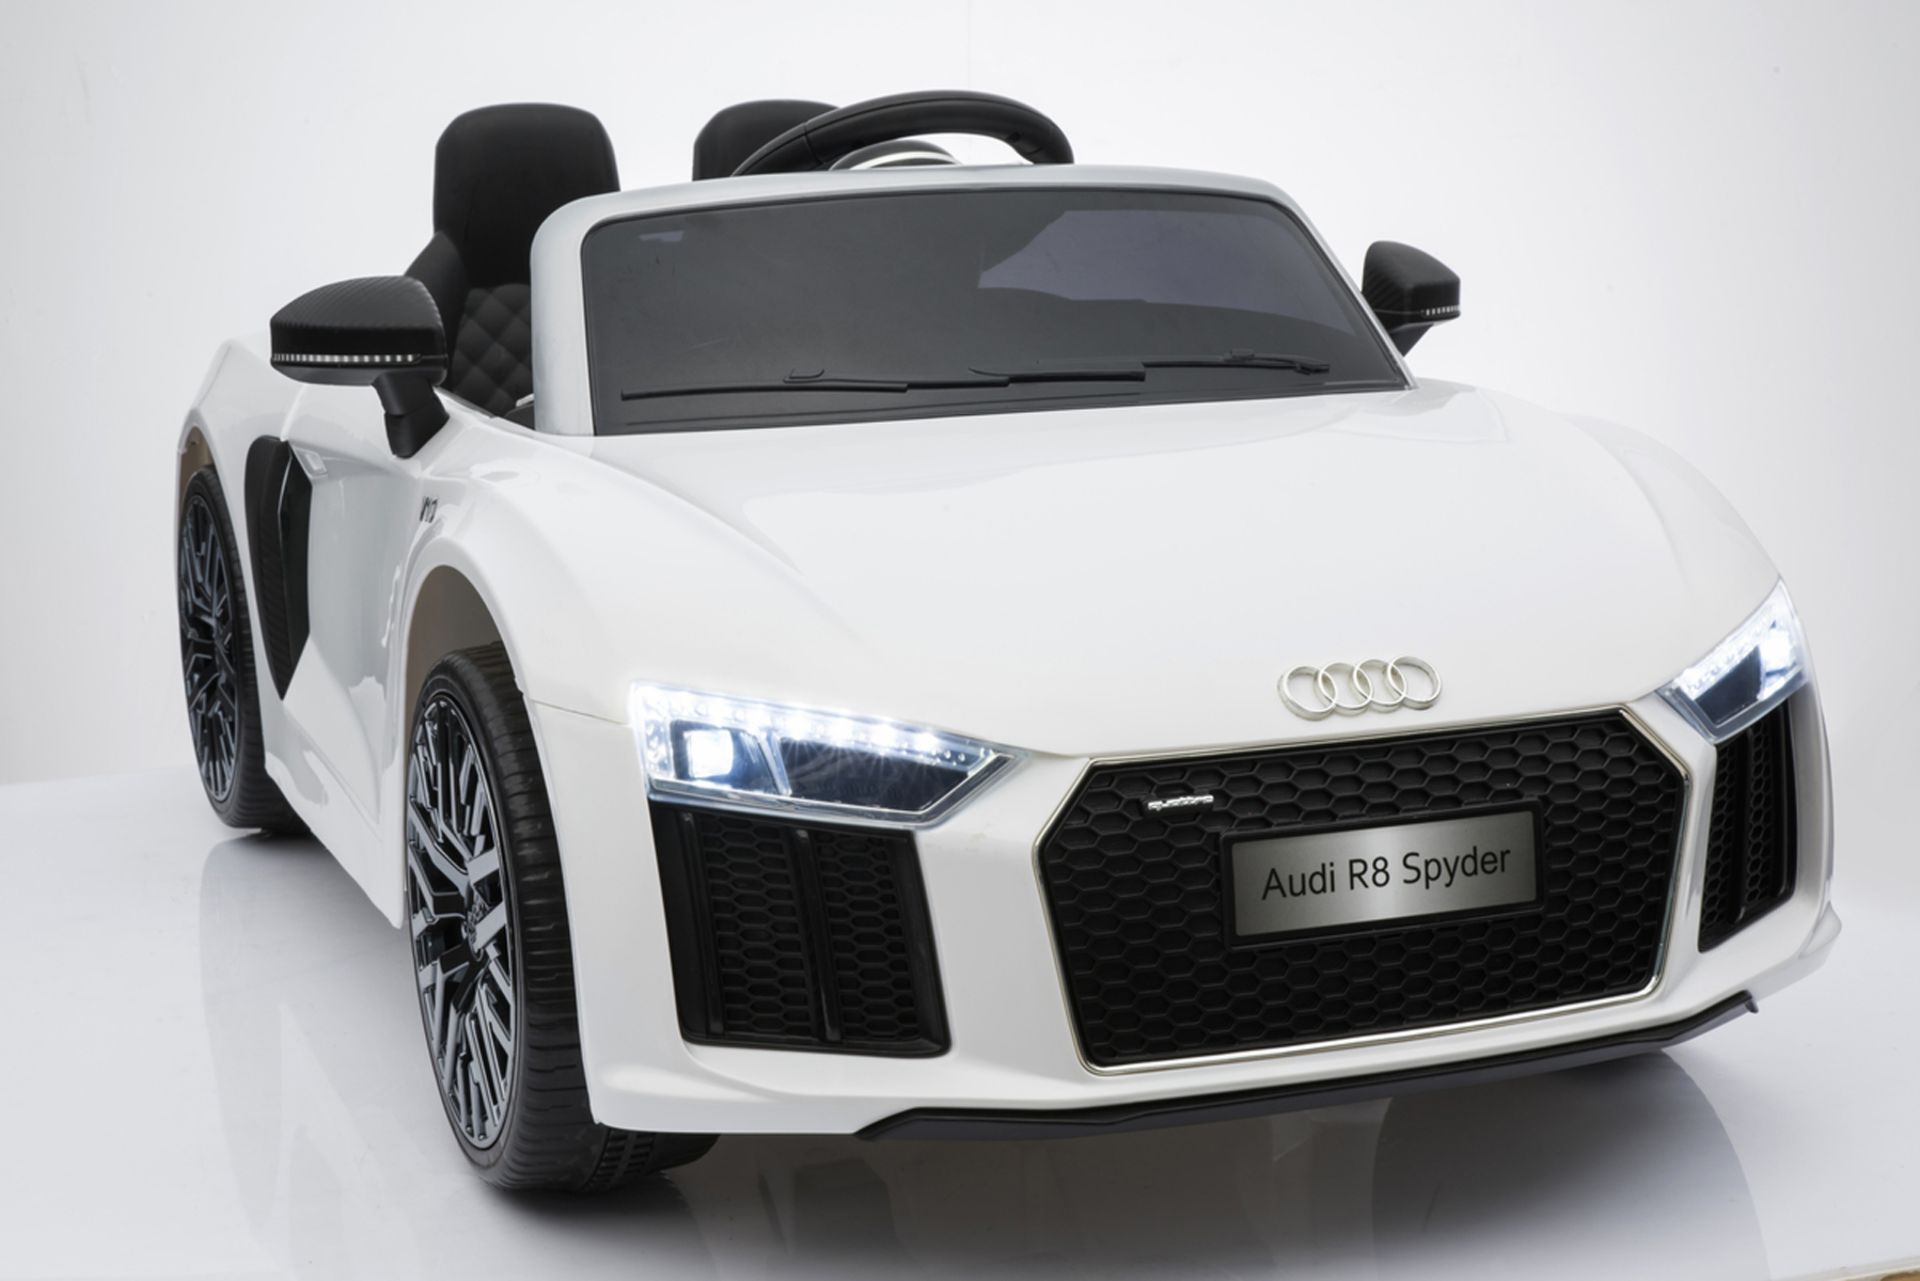 RIDE ON FULLY LICENSED AUDI R8 SPYDER 6V WITH PARENTAL REMOTE CONTROL - WHITE - Image 5 of 8